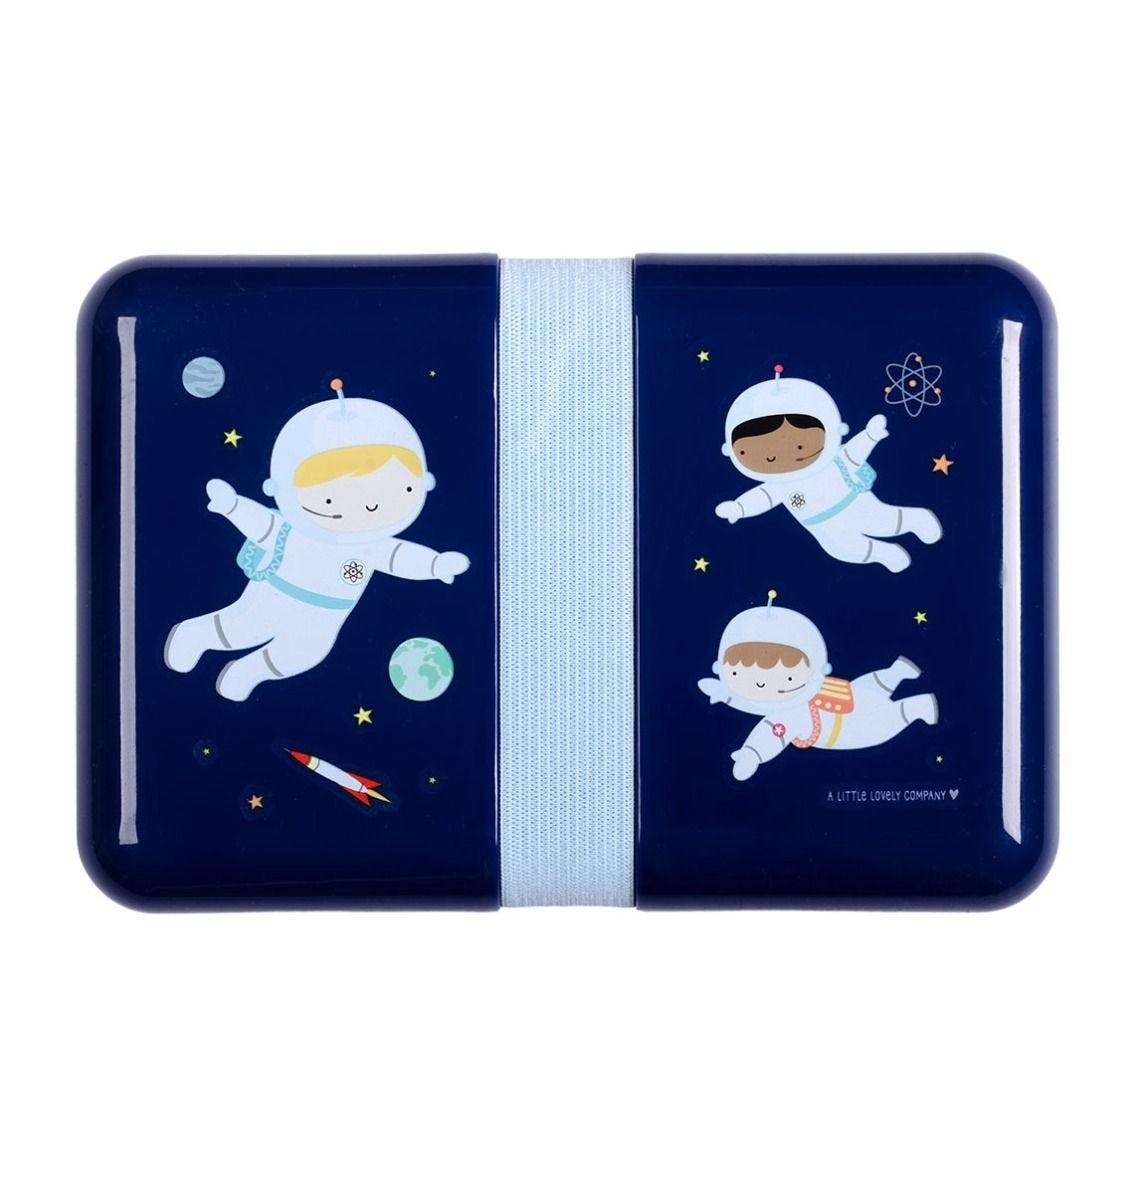 A little Lovely Company - Lunch box: Astronauts